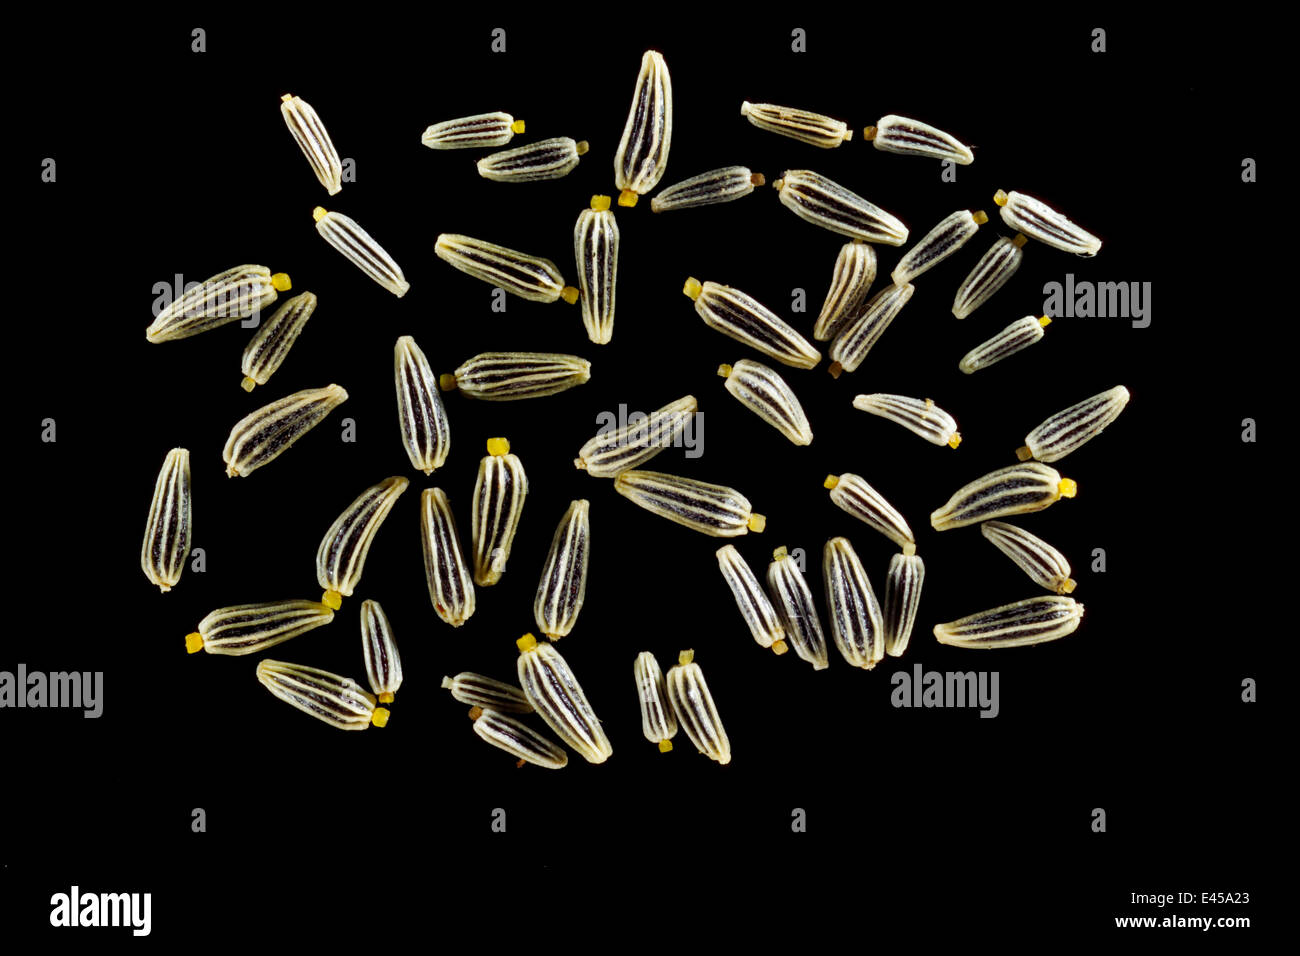 Seeds of Oxeye daisy (Chrysanthemum leucanthemum), Europe. Dispersal is coincidental by wind, animals or water. The seeds lack any obvious structures for specialised dispersal. Stock Photo